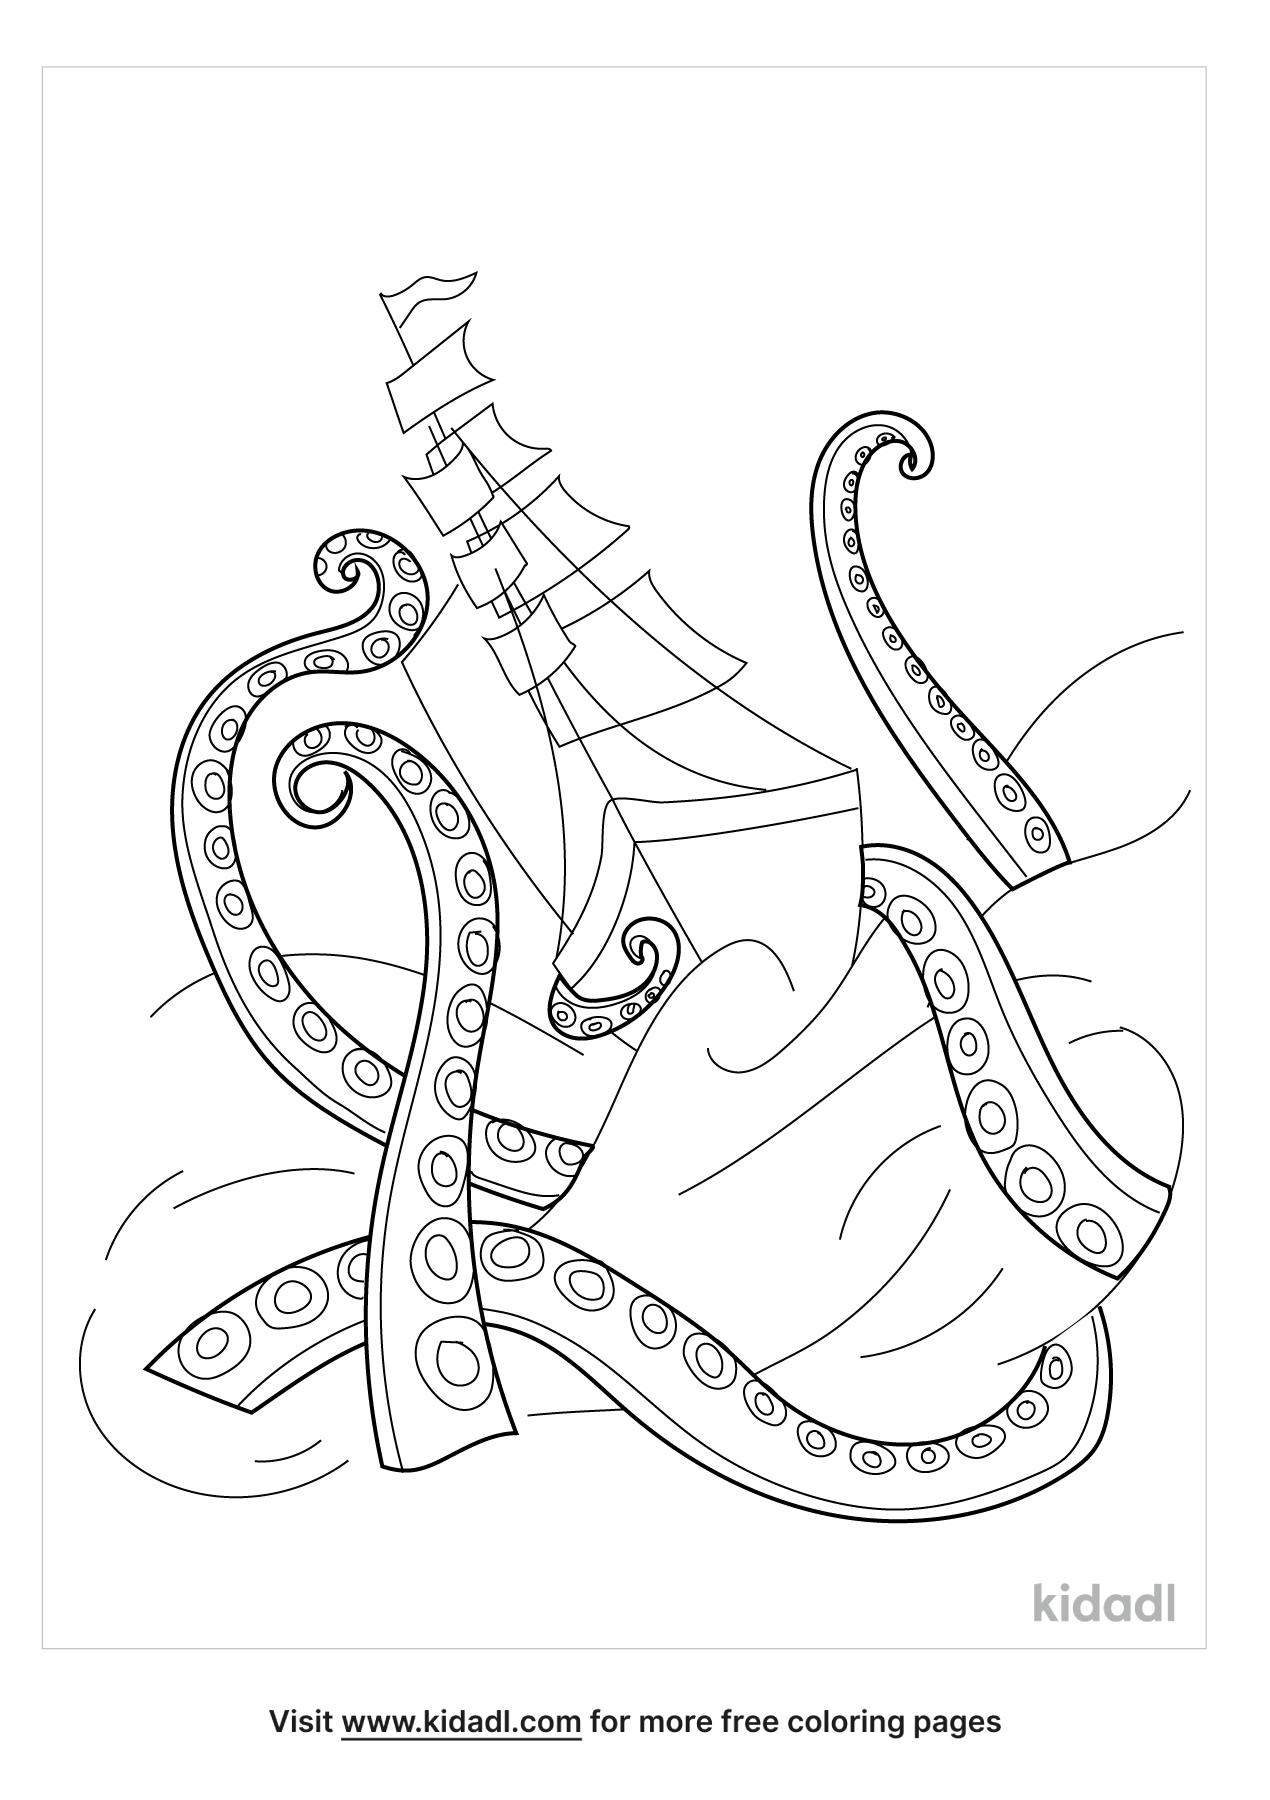 Kraken Coloring Pages | Free Fairytales & Stories Coloring Pages | Kidadl